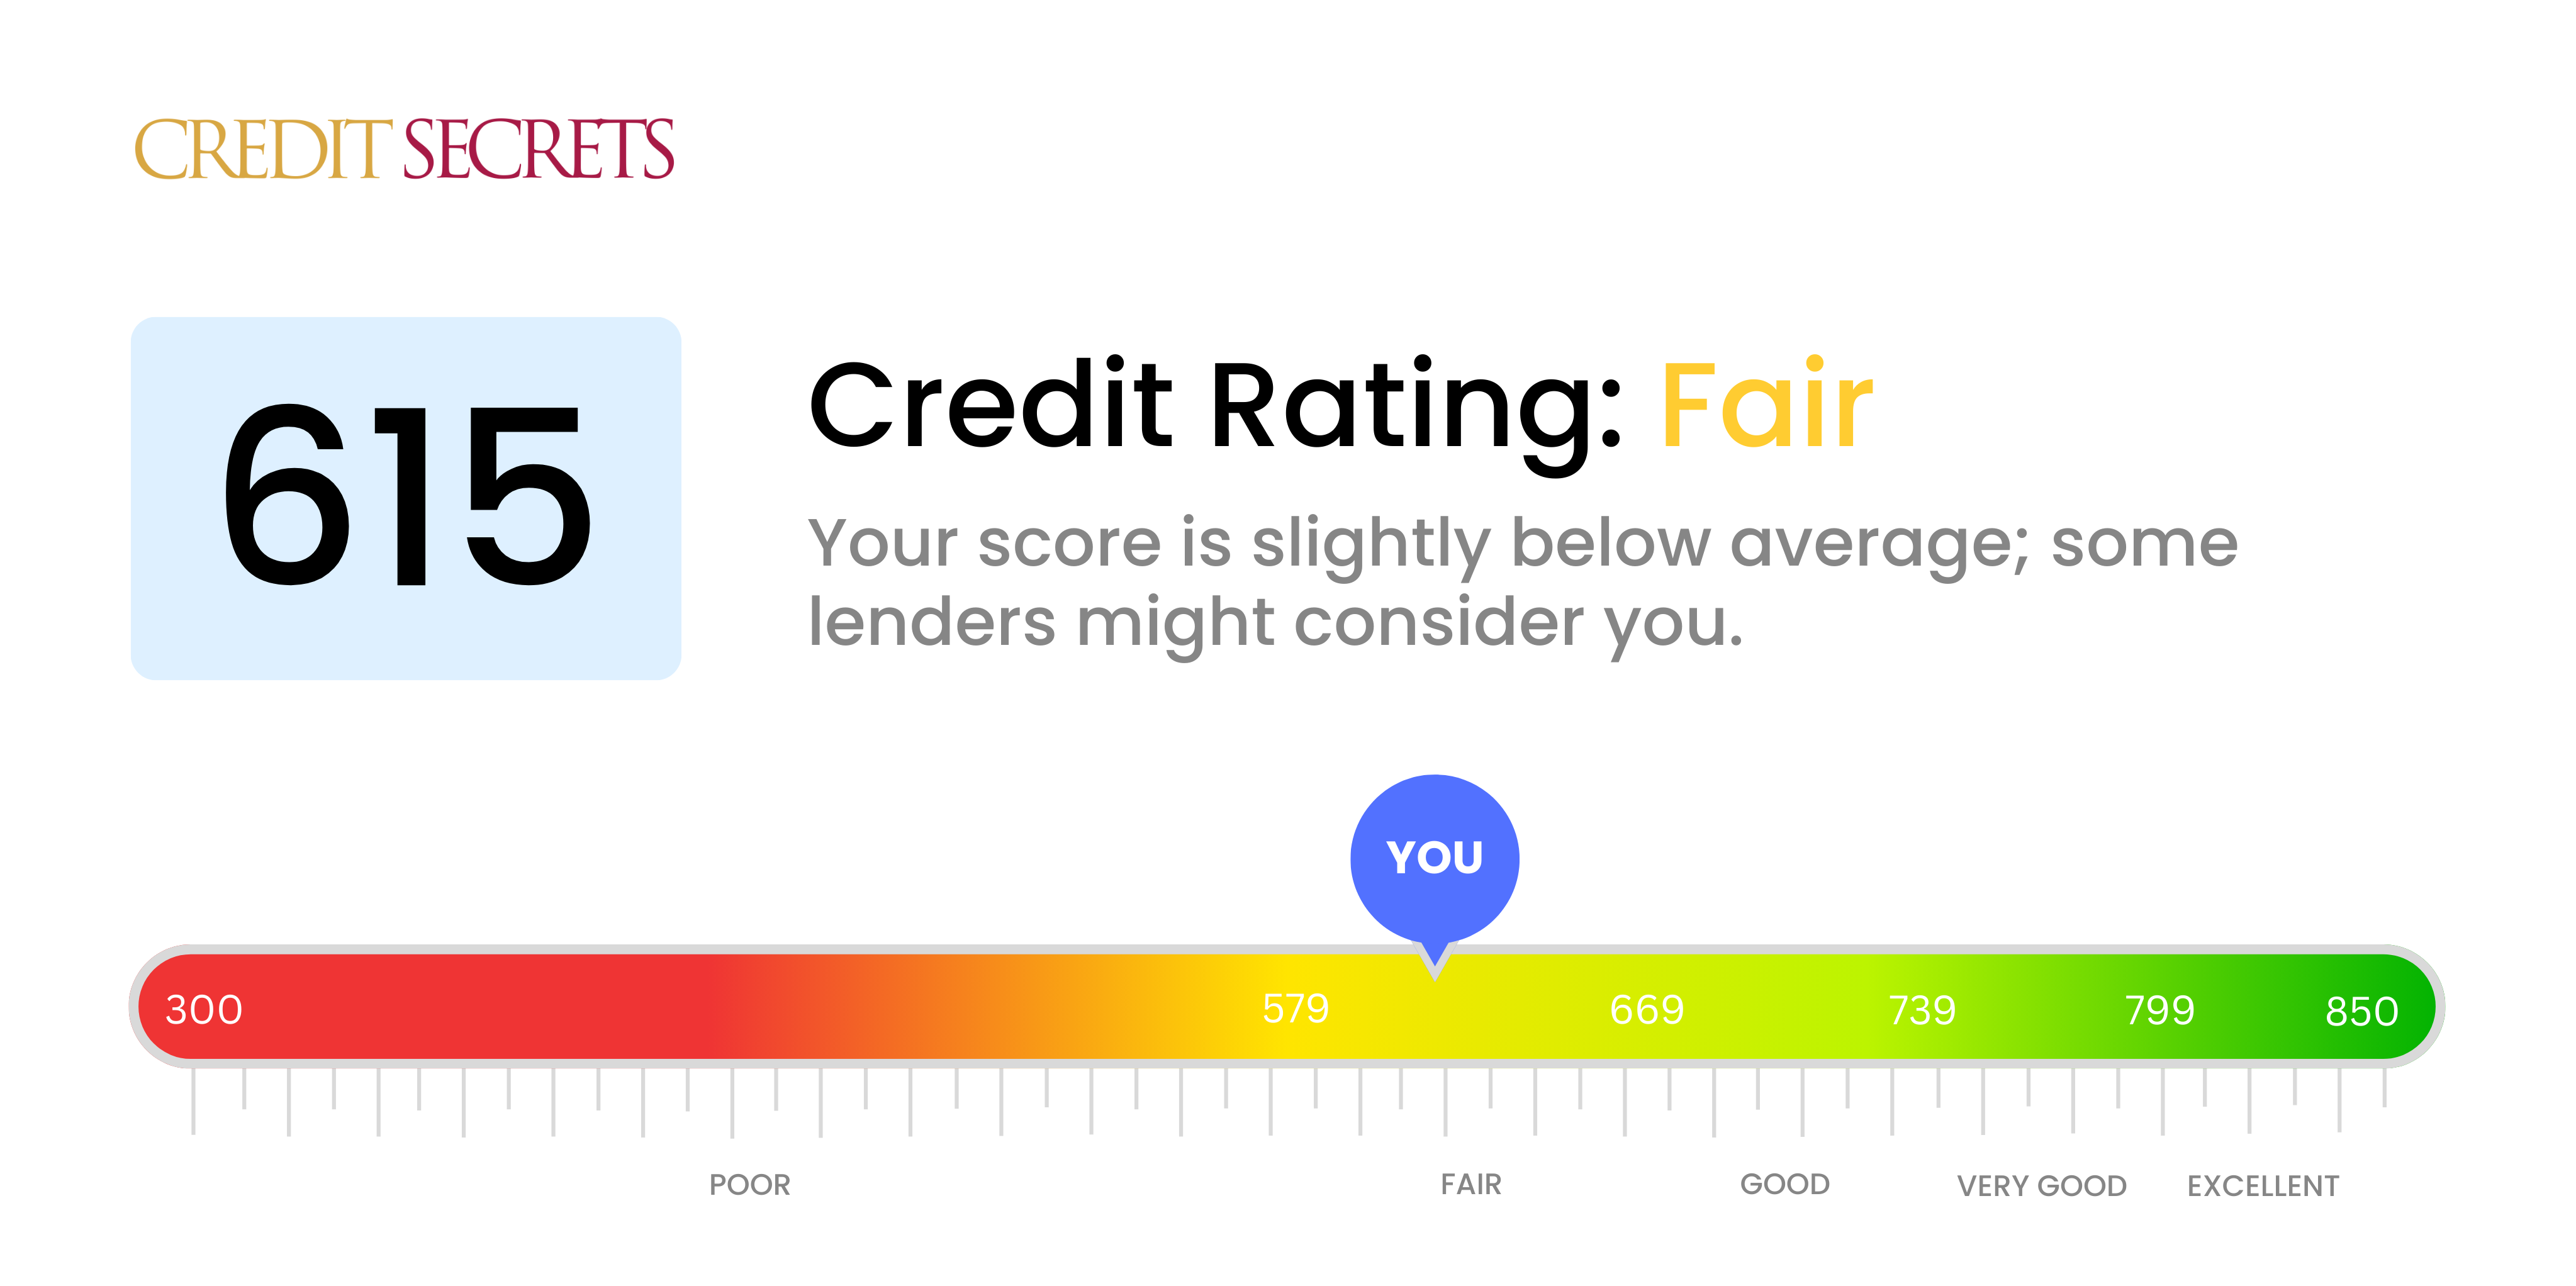 Is 615 a good credit score?